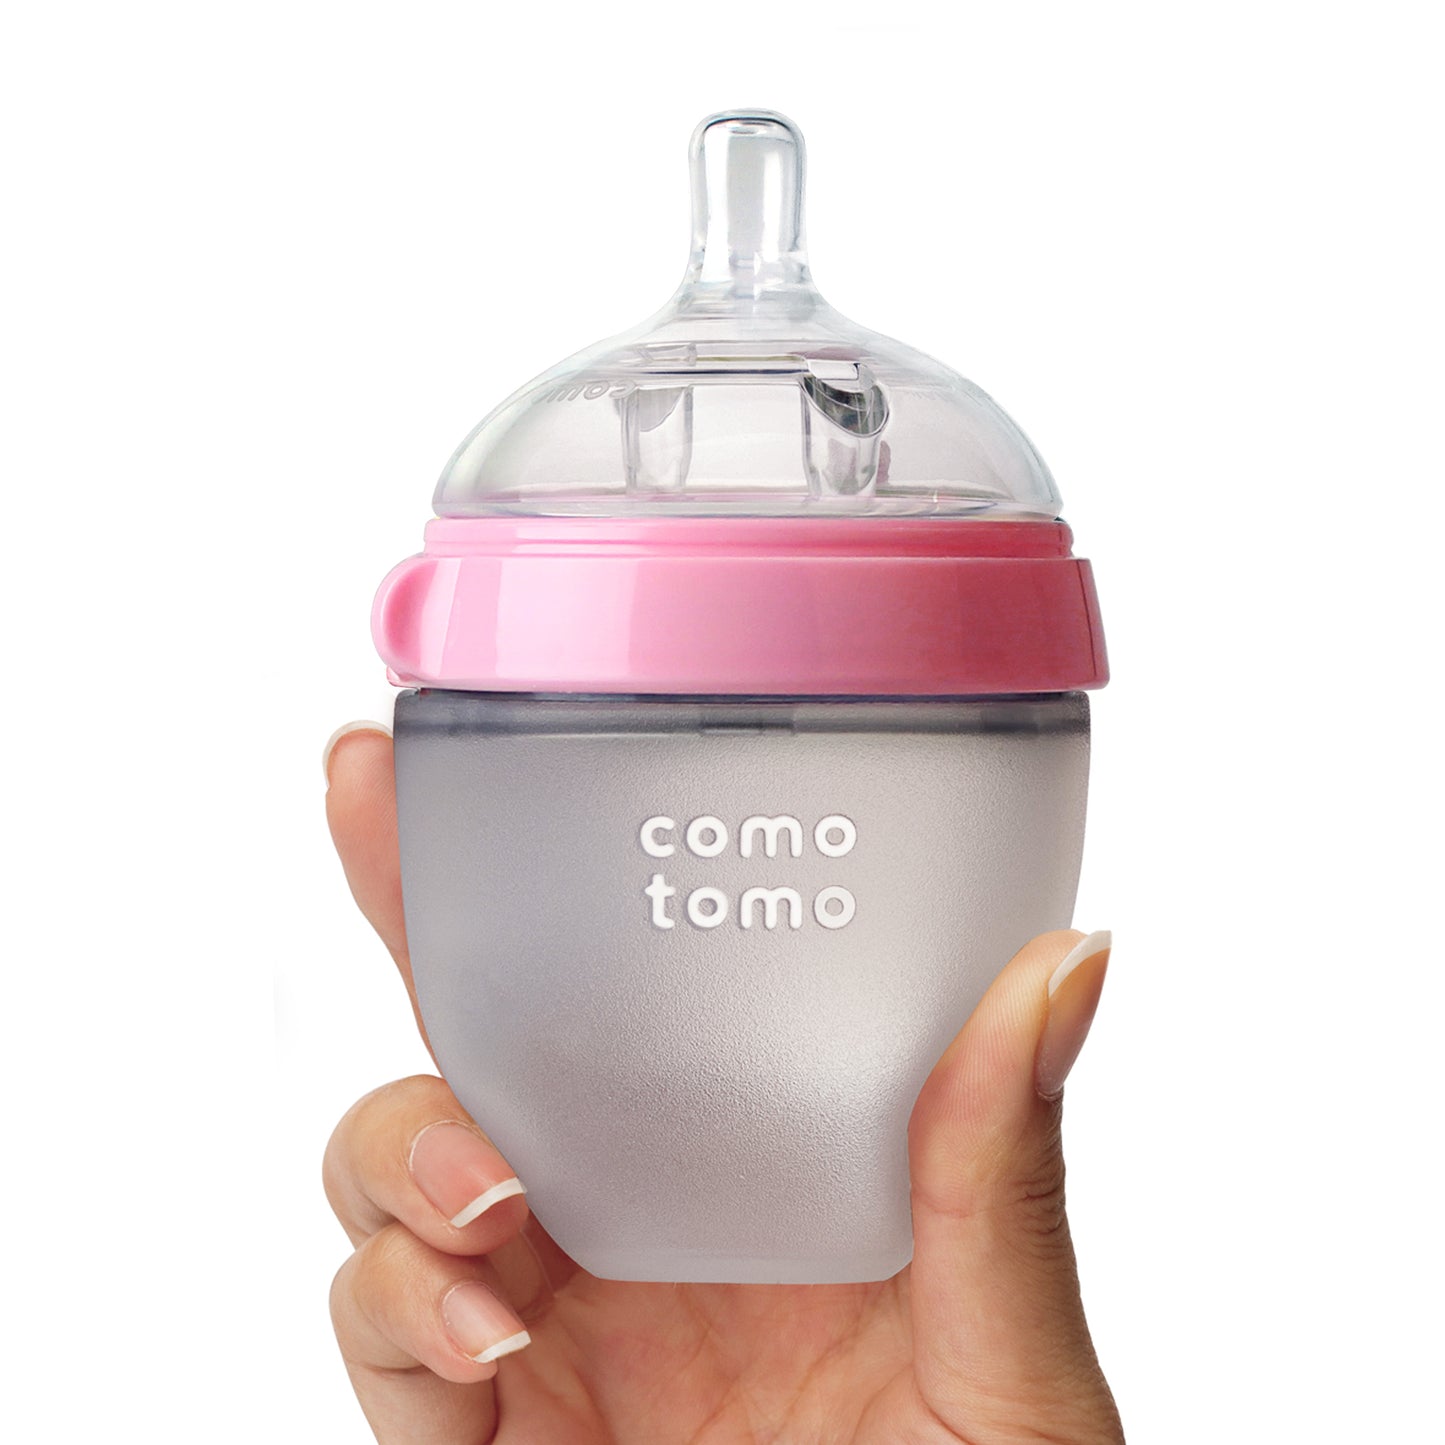 Comotomo - Natural Feel Baby Bottle (Double Pack) - Pink & White,150 ml